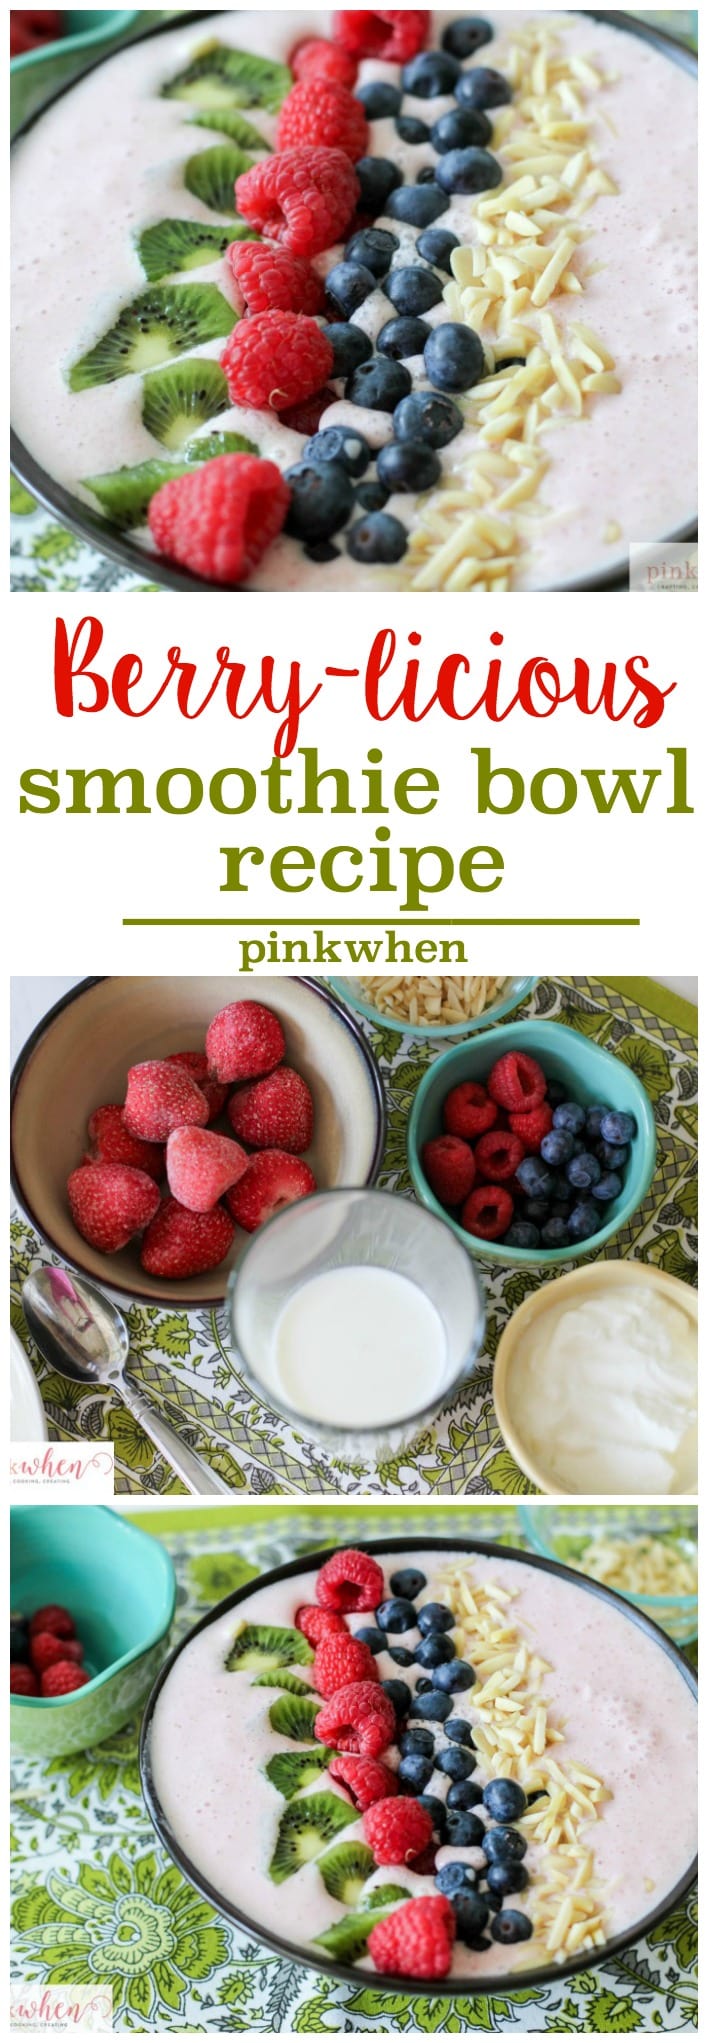 Berry-licious Smoothie Bowl Recipe made with real organic milk, greek yogurt, strawberries, almonds, blueberries, raspberries, and kiwi for a berry packed bowl with 25g of protein! @Milk #MyMorningProtein #MilkLife